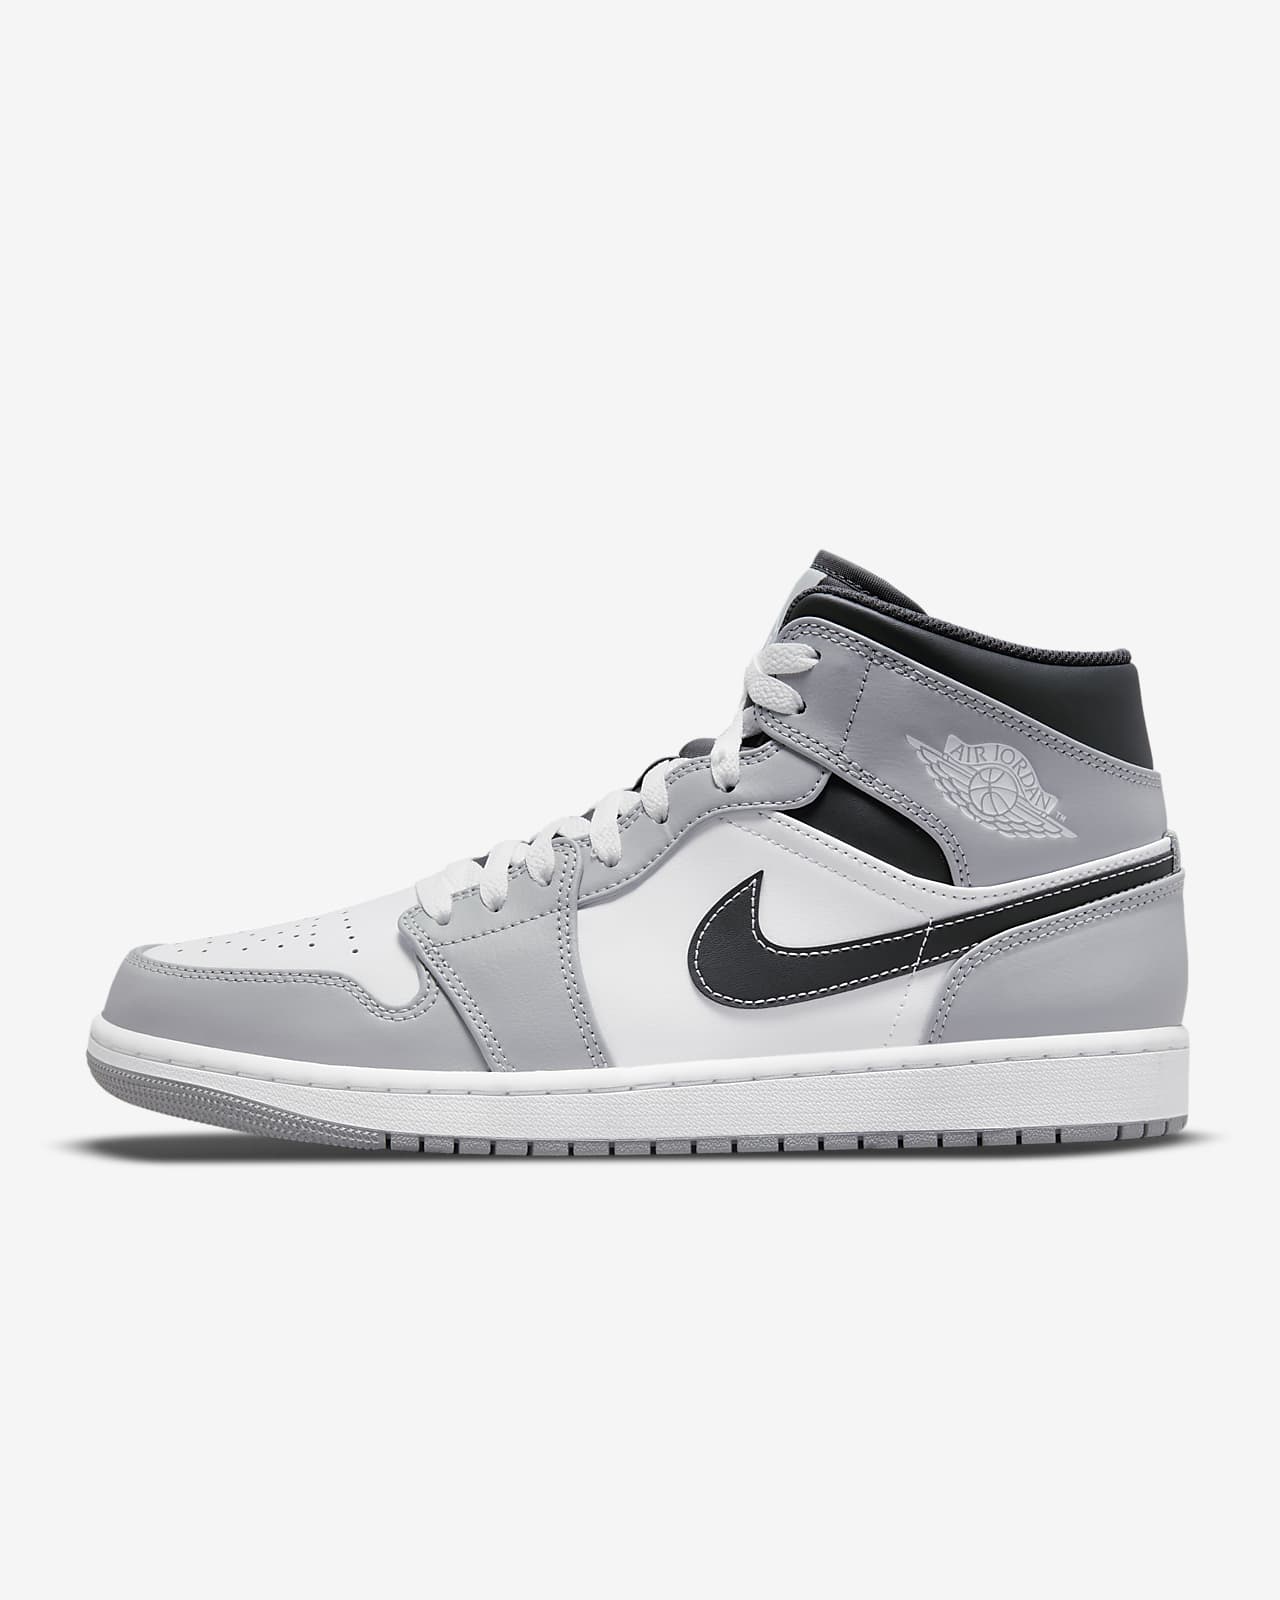 family Ancient times Substantially Air Jordan 1 Mid Shoes. Nike.com